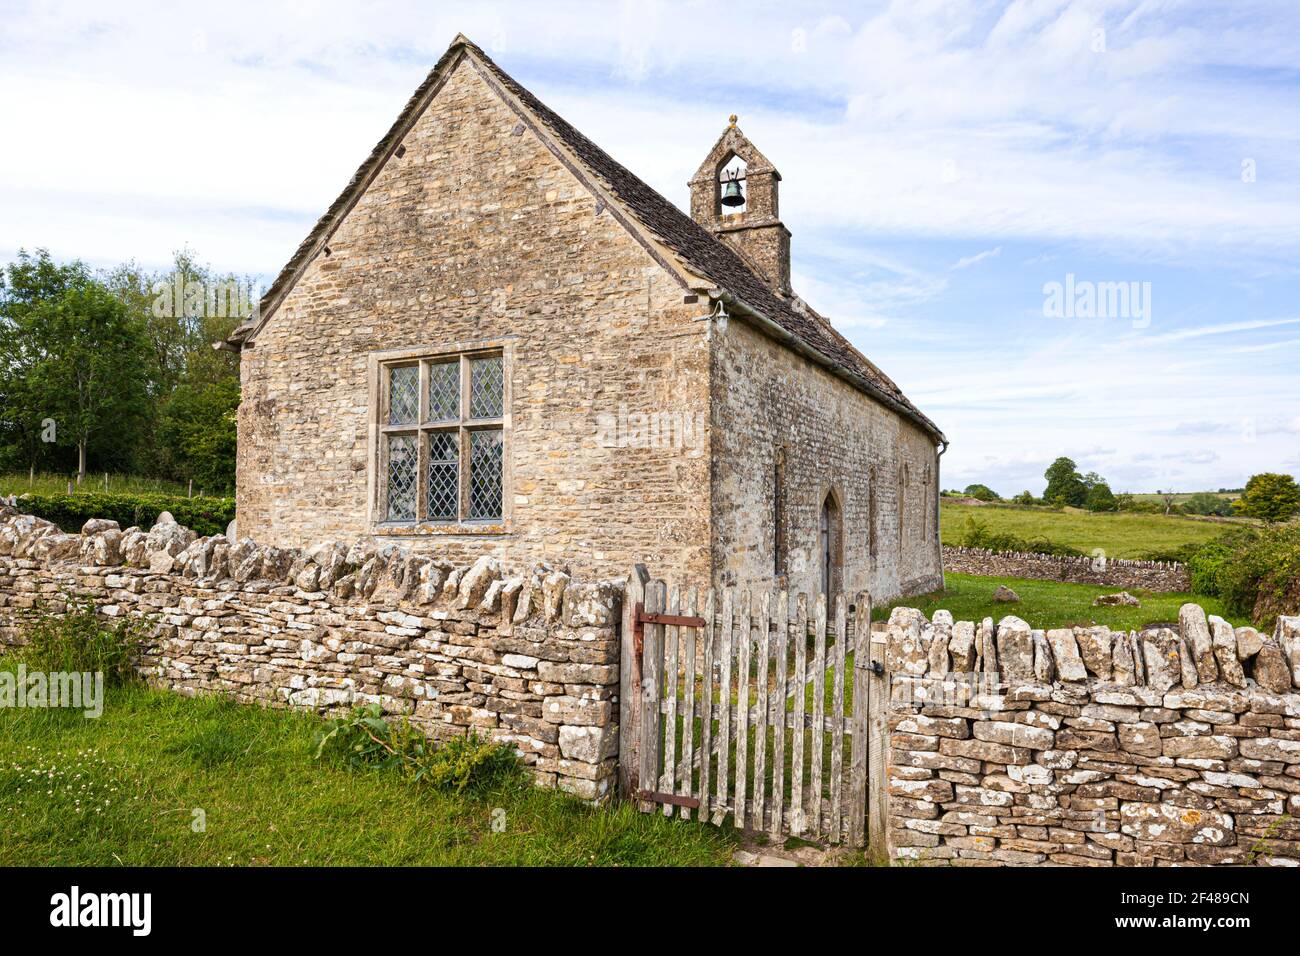 The 13th century church of St Oswald, now isolated, standing on the edge of a deserted medieval village at Widford, Oxfordshire UK Stock Photo